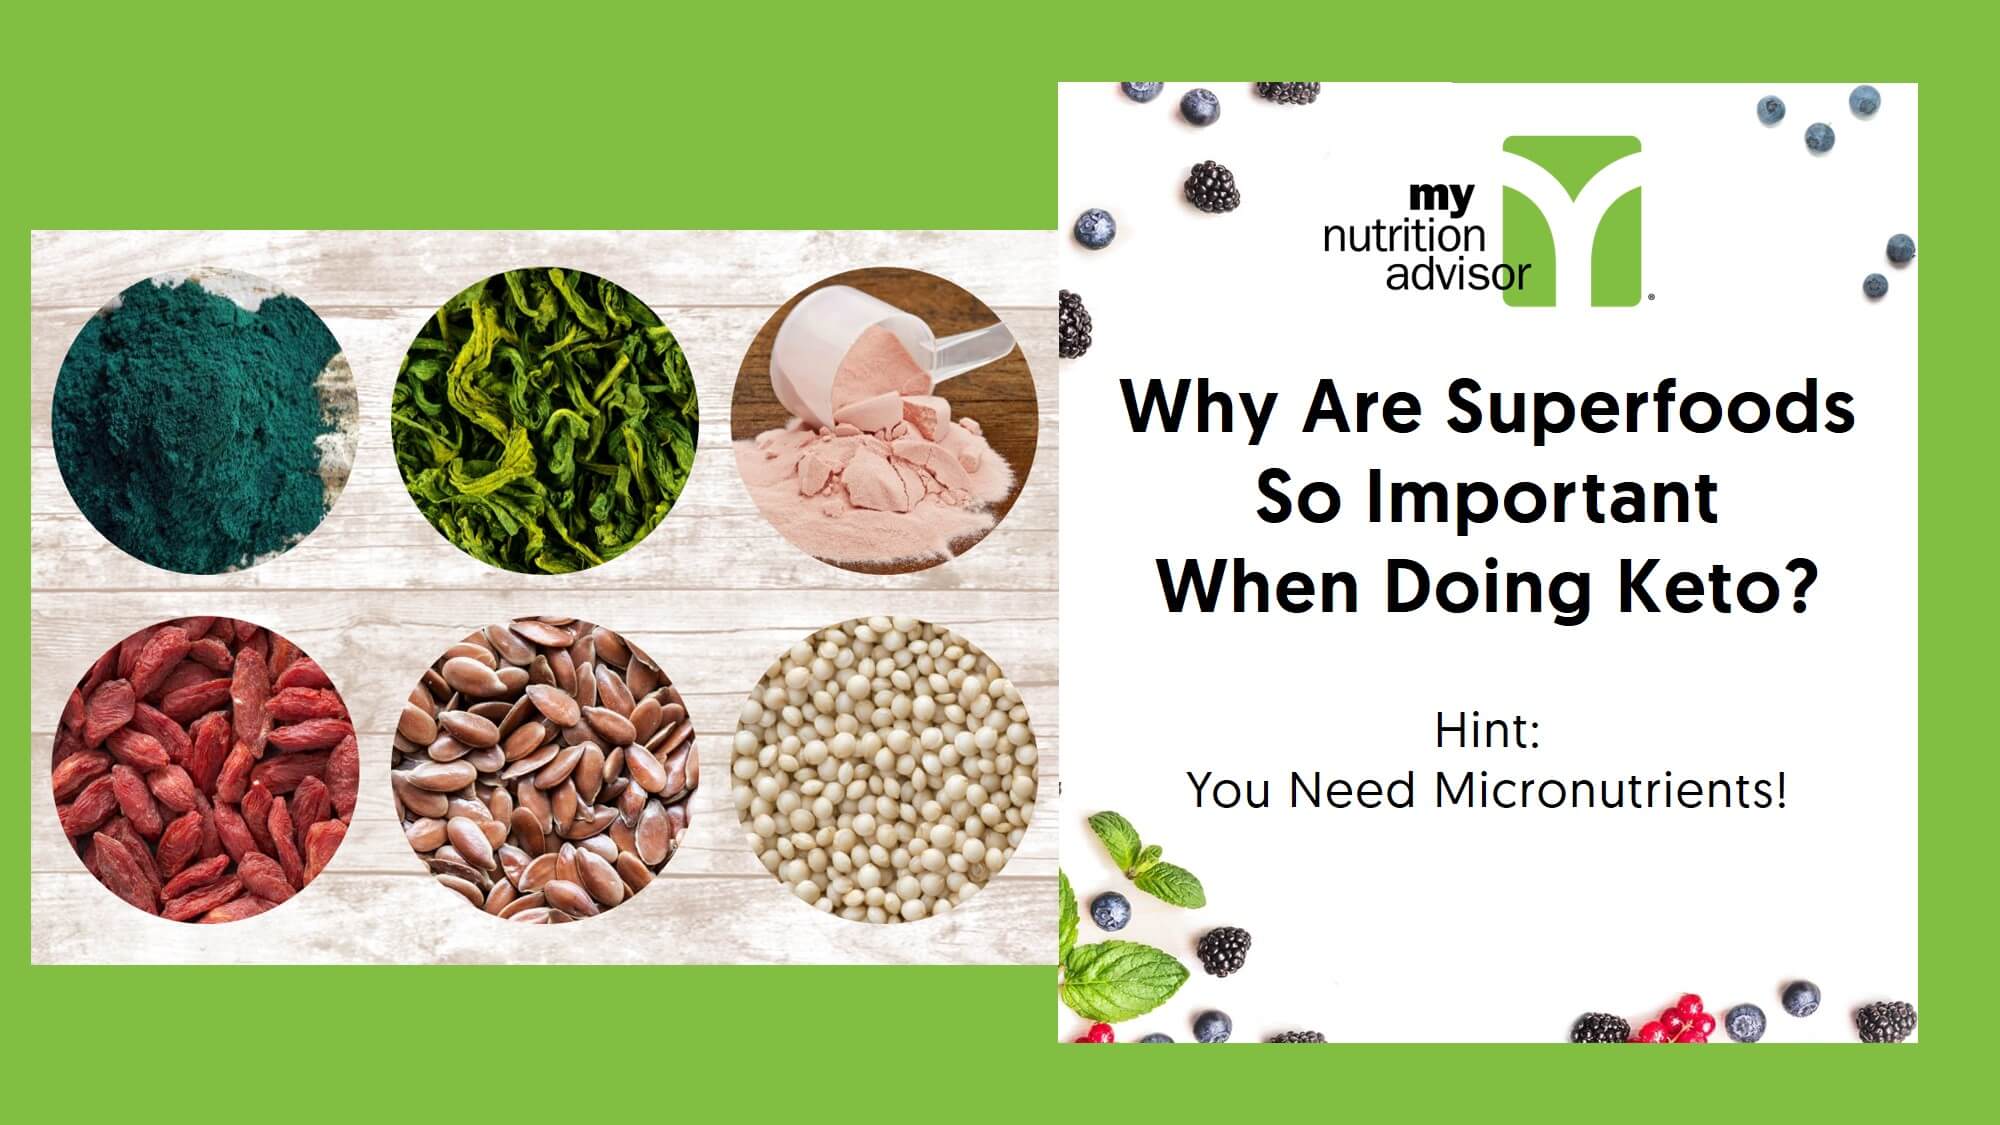 Why Adding Superfoods Is So Important When On Keto